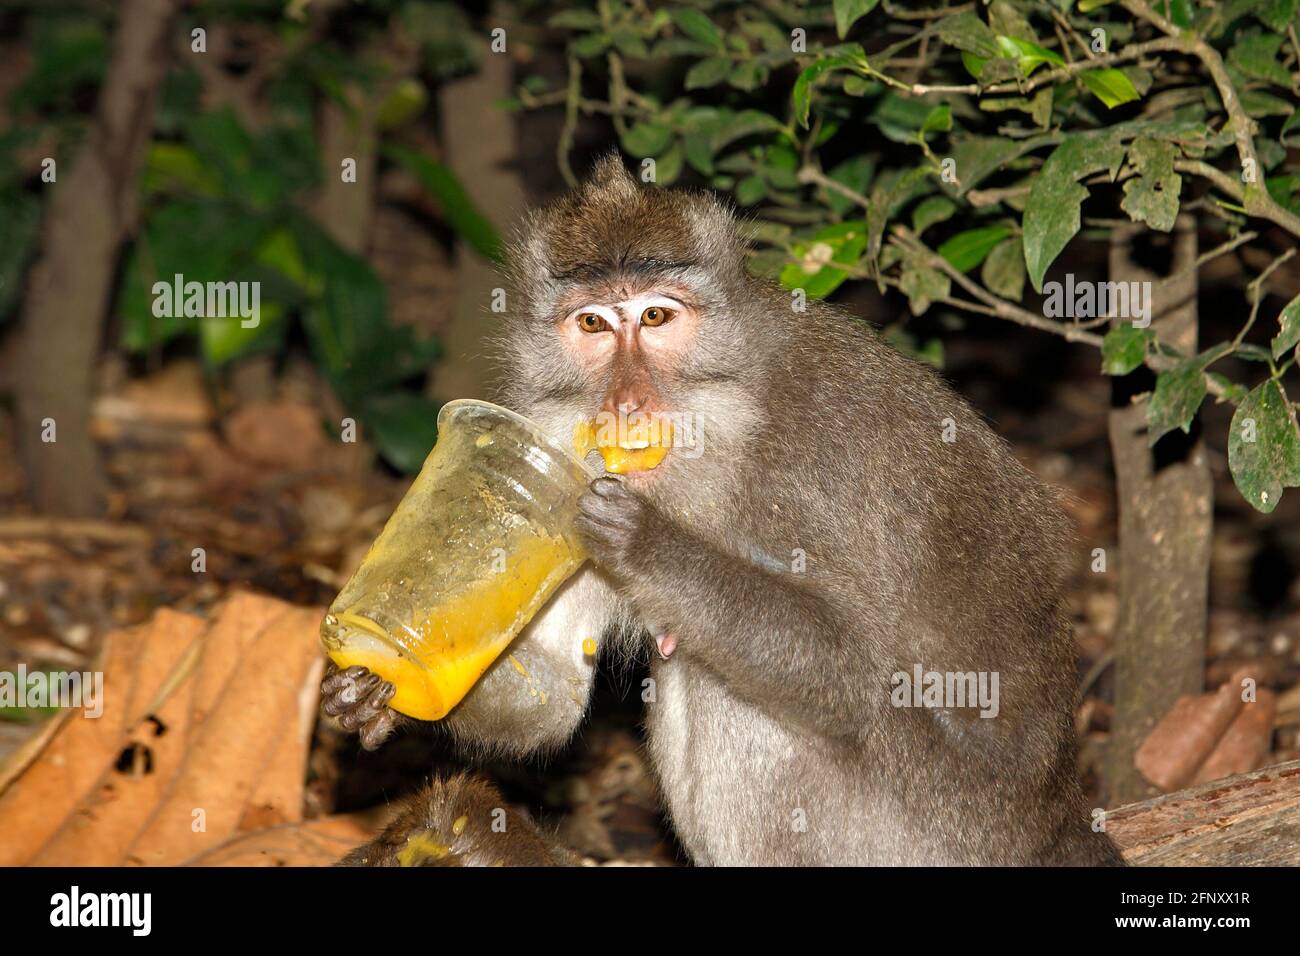 Long Tailed Macaque, Macaca fascicularis. Monkey is drinking juice from plastic glass and has it all around the mouth and lips. Funny animal photo. Stock Photo